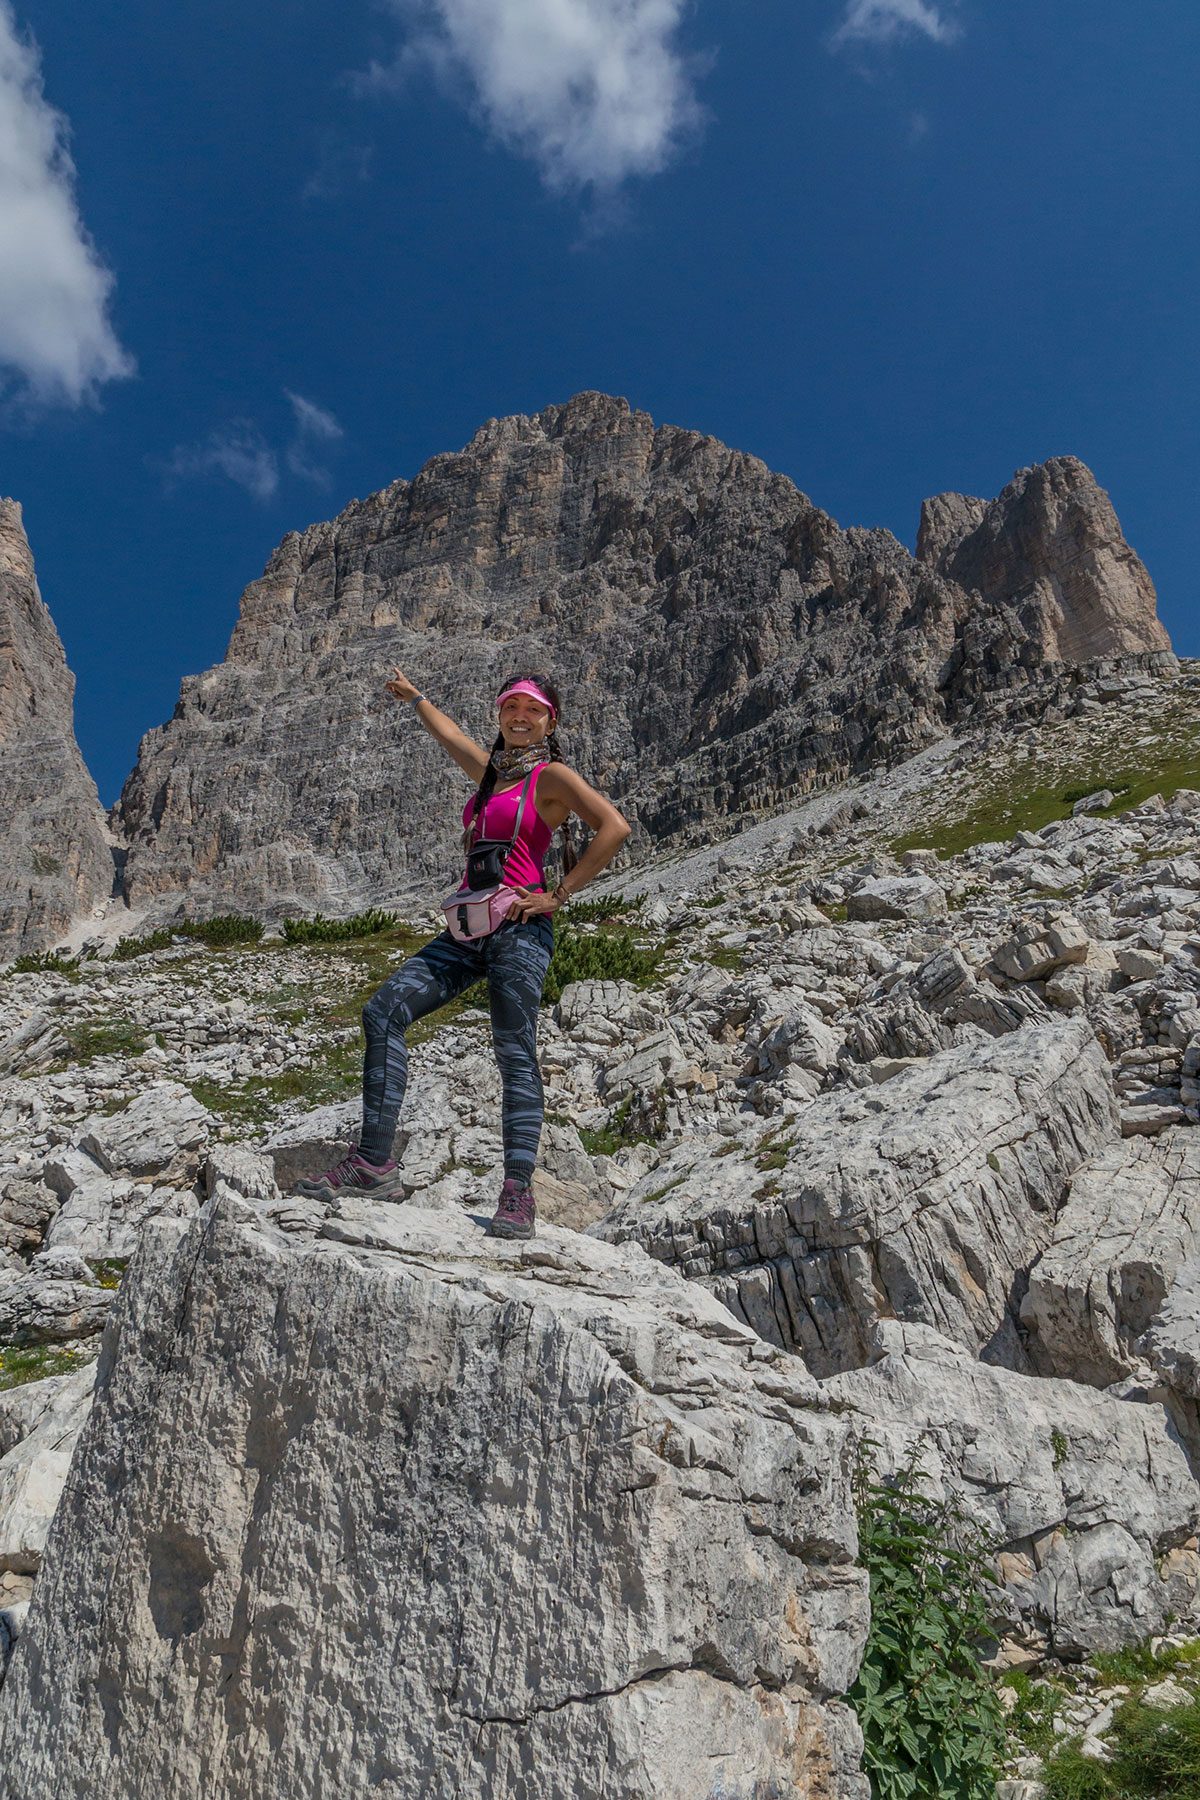 Big Pinnacle - South face of the Three Peaks Dolomites, Italy - 